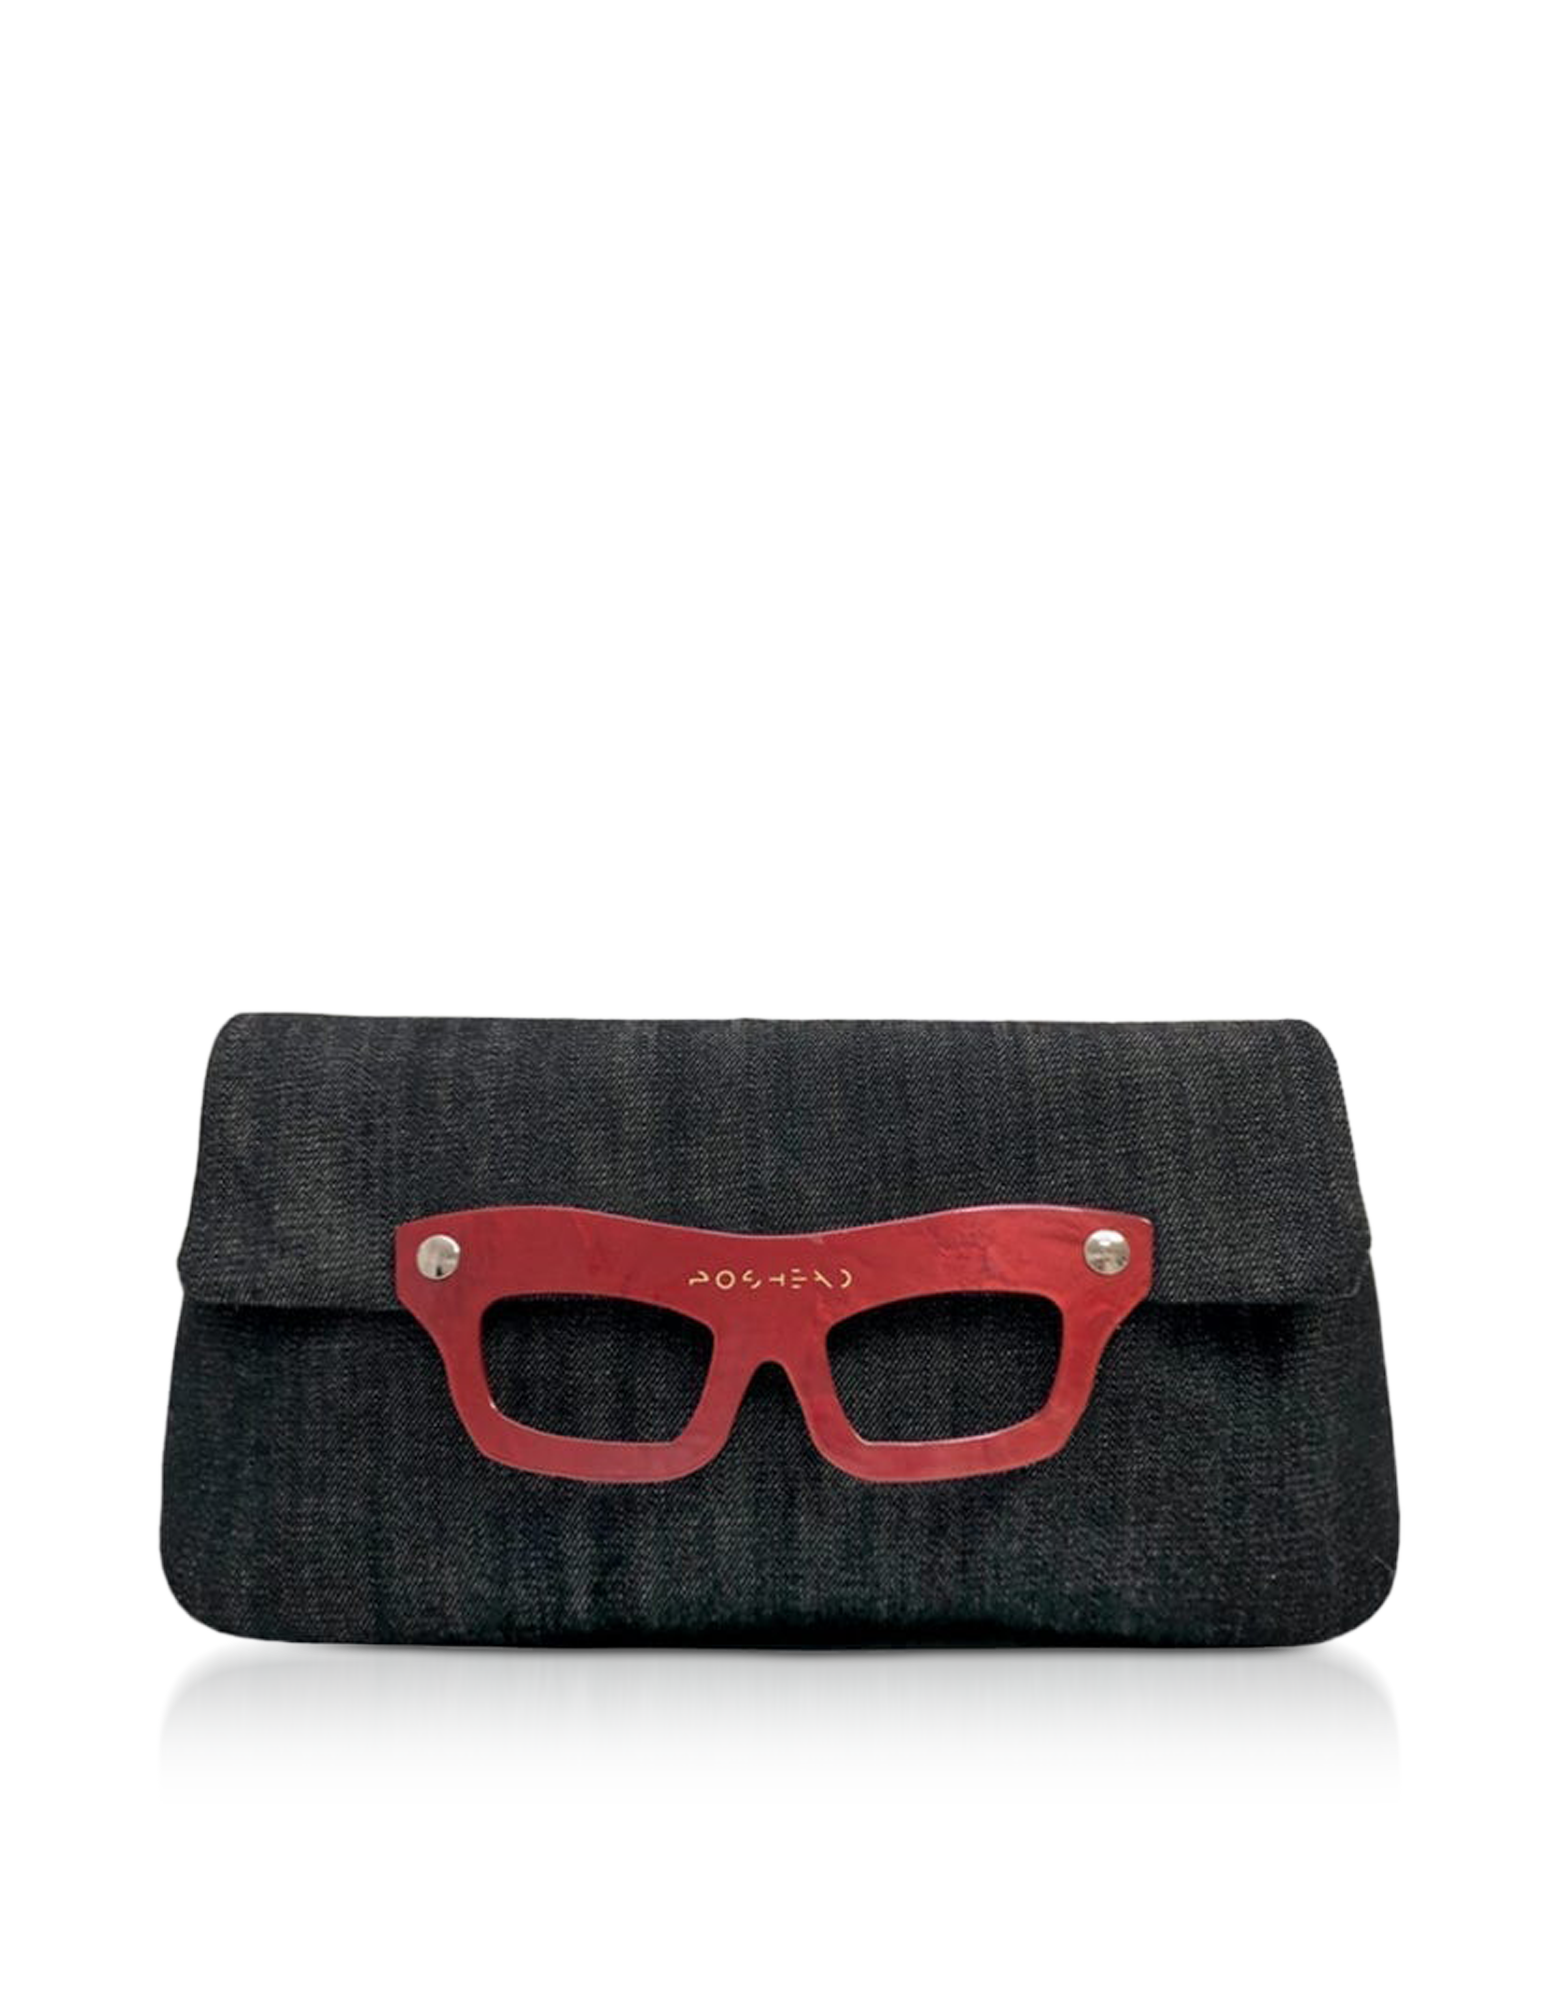 Poshead Lucy Denim Black and Red Clutch